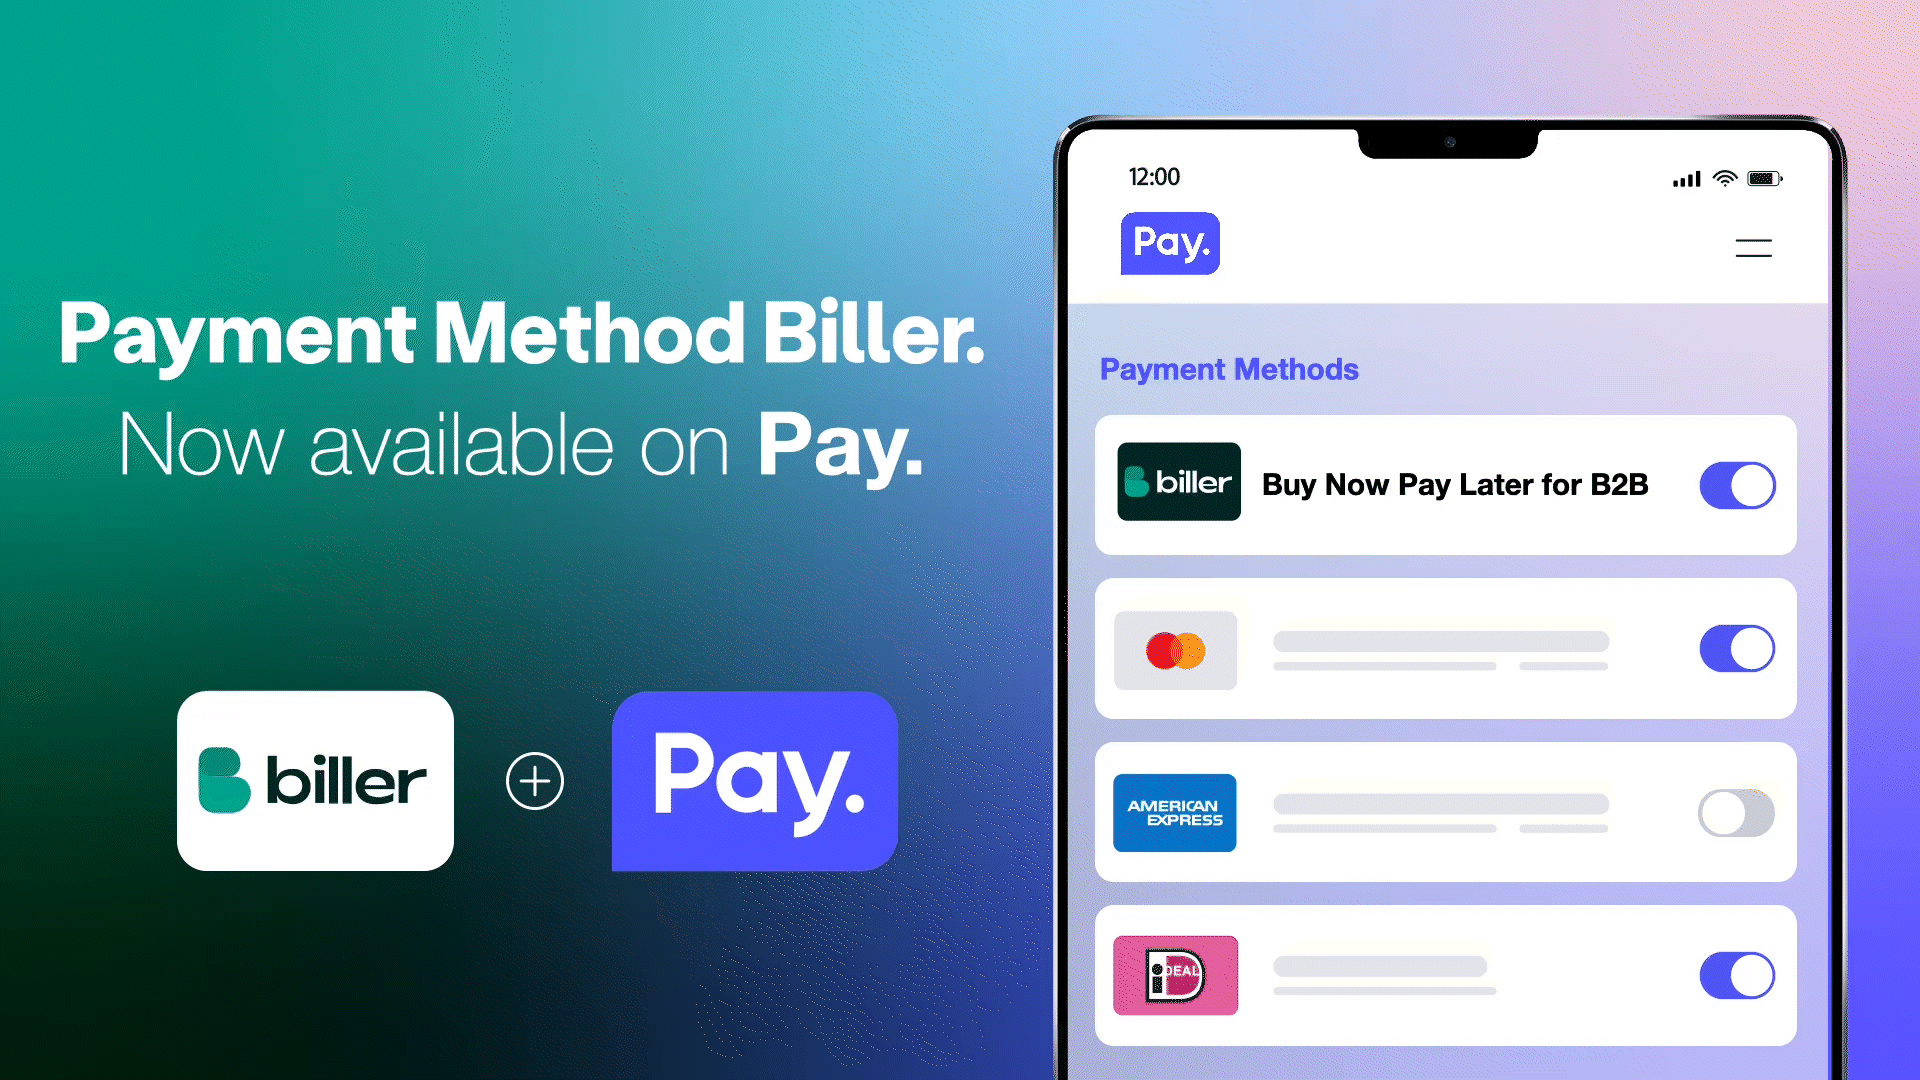 Pay. will be the first payment provider to partner with Biller